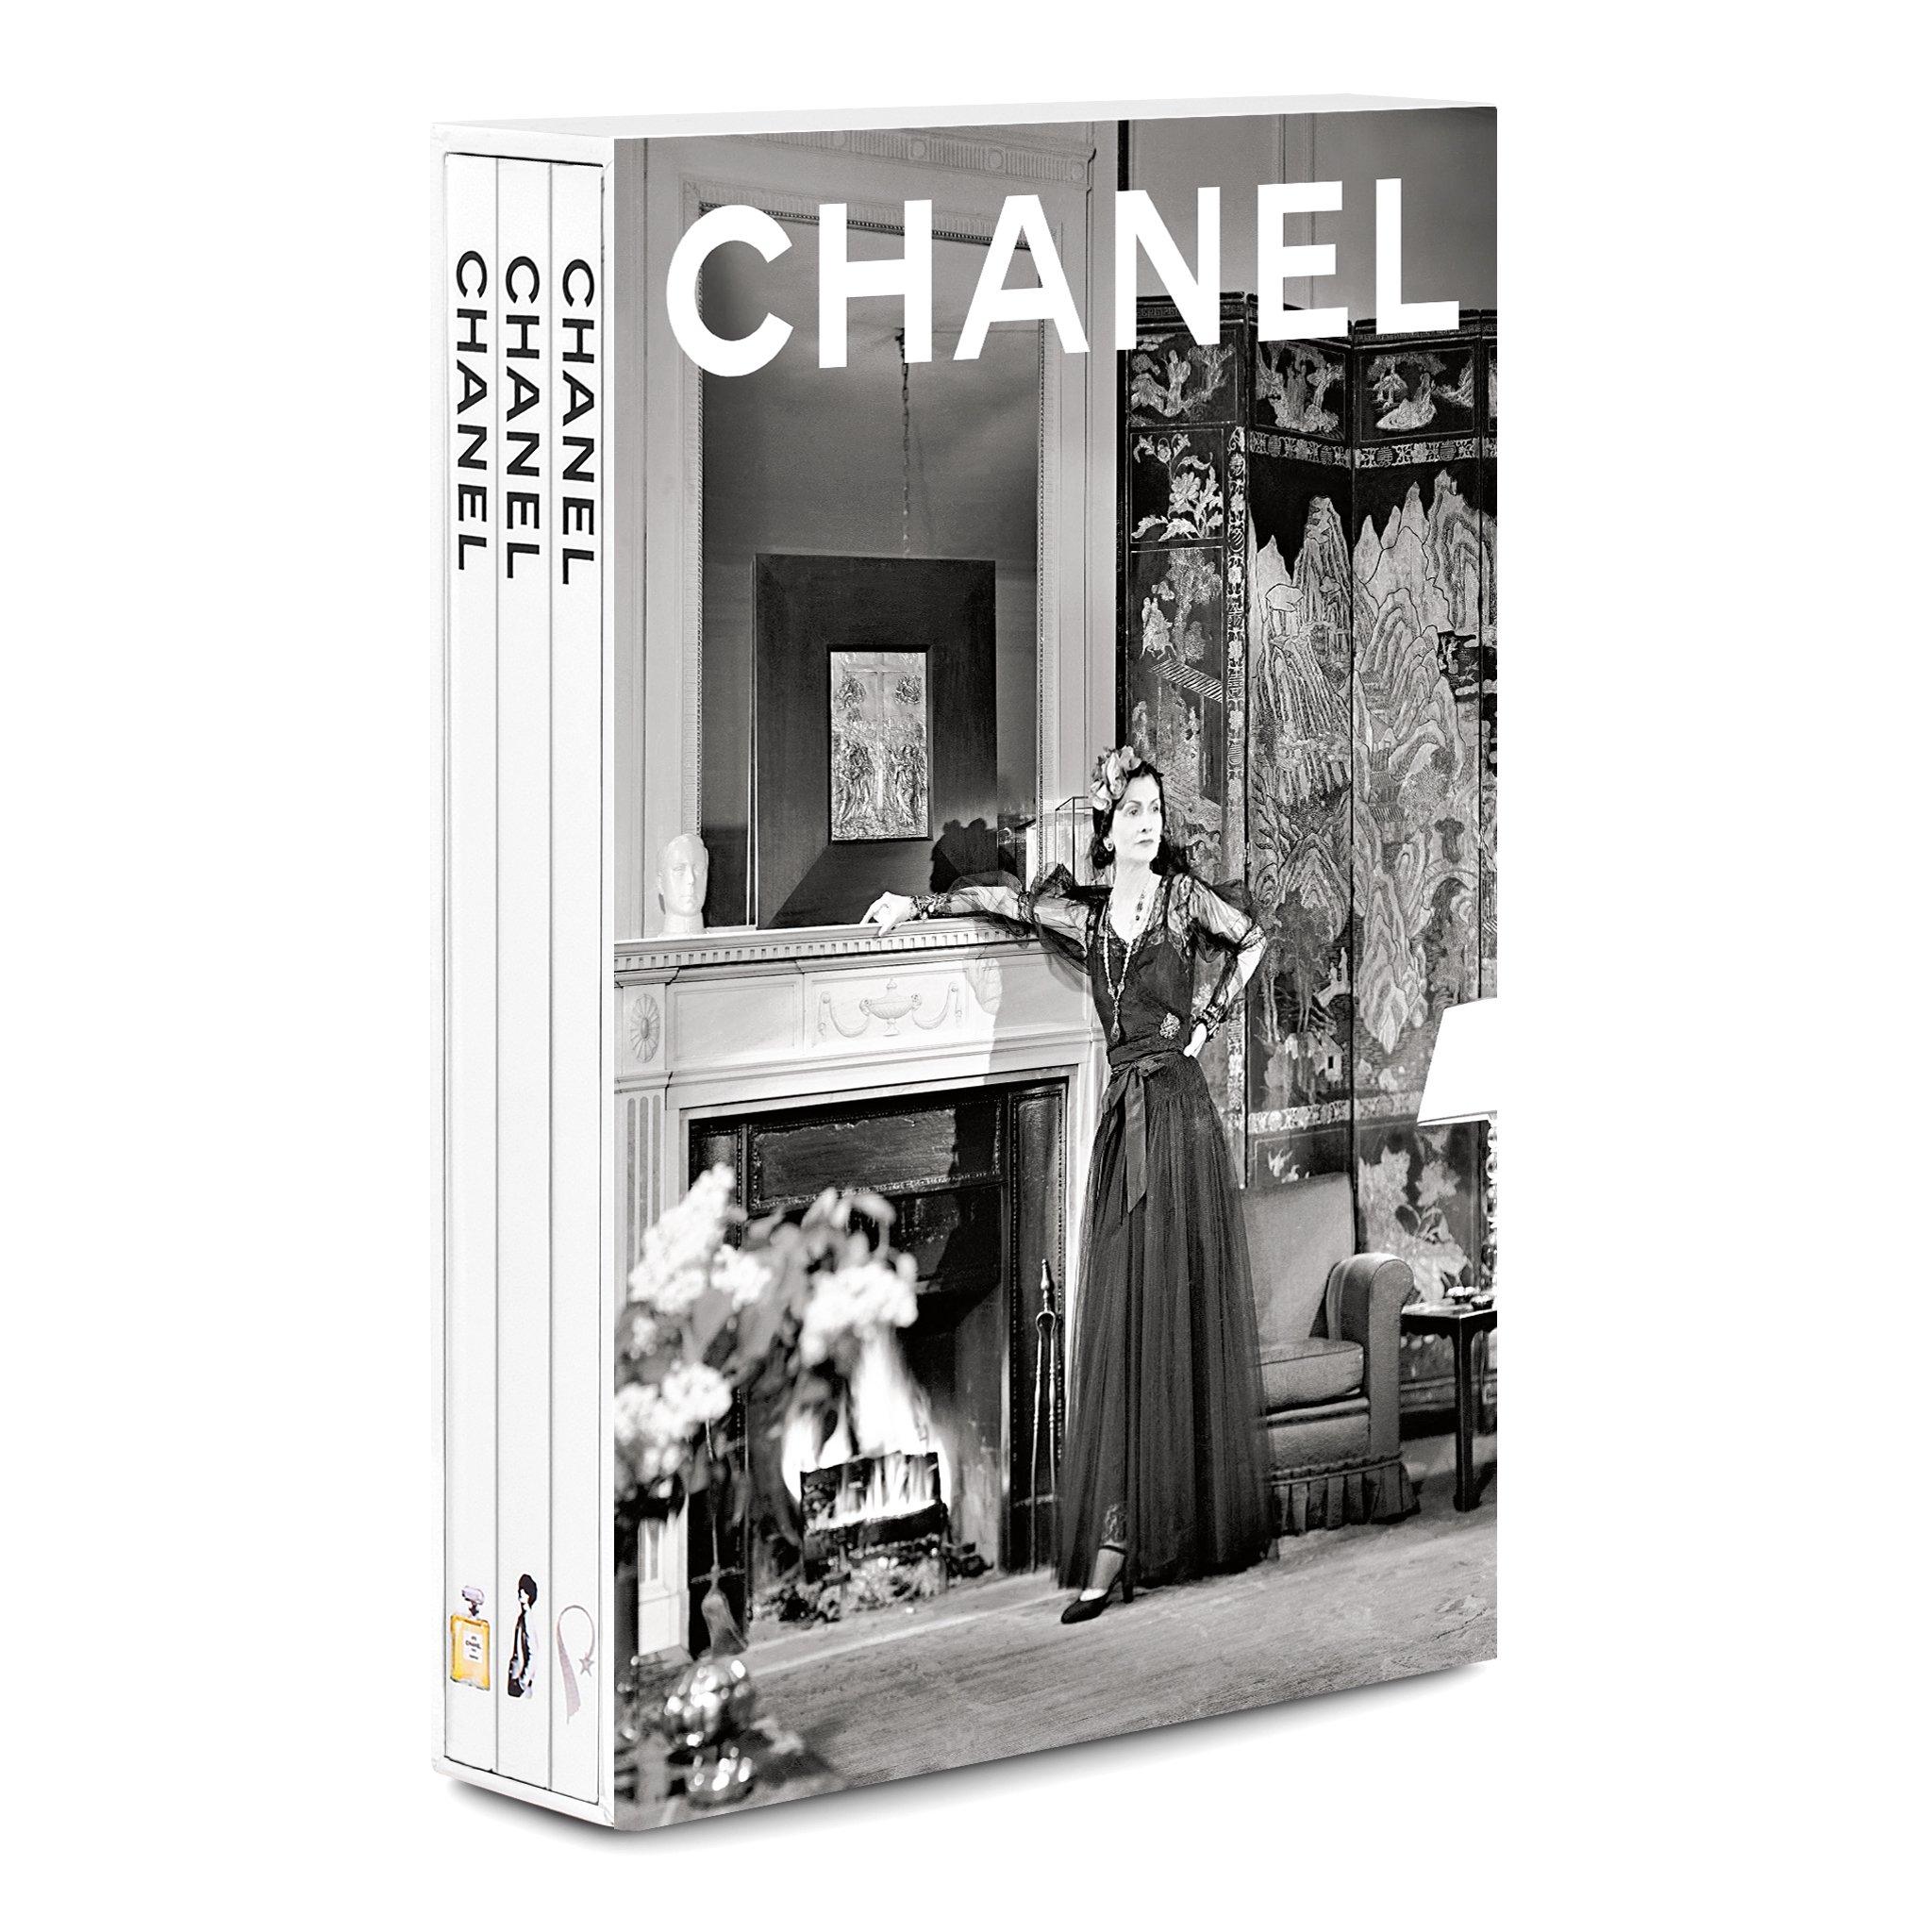 Assouline and Chanel present a newly updated trilogy celebrating the timeless spirit, signatures, and heritage of the house of Chanel, this slipcase set includes three Mémoire volumes: Chanel Fashion, Chanel Jewelry And Watches, and Chanel Fragrance